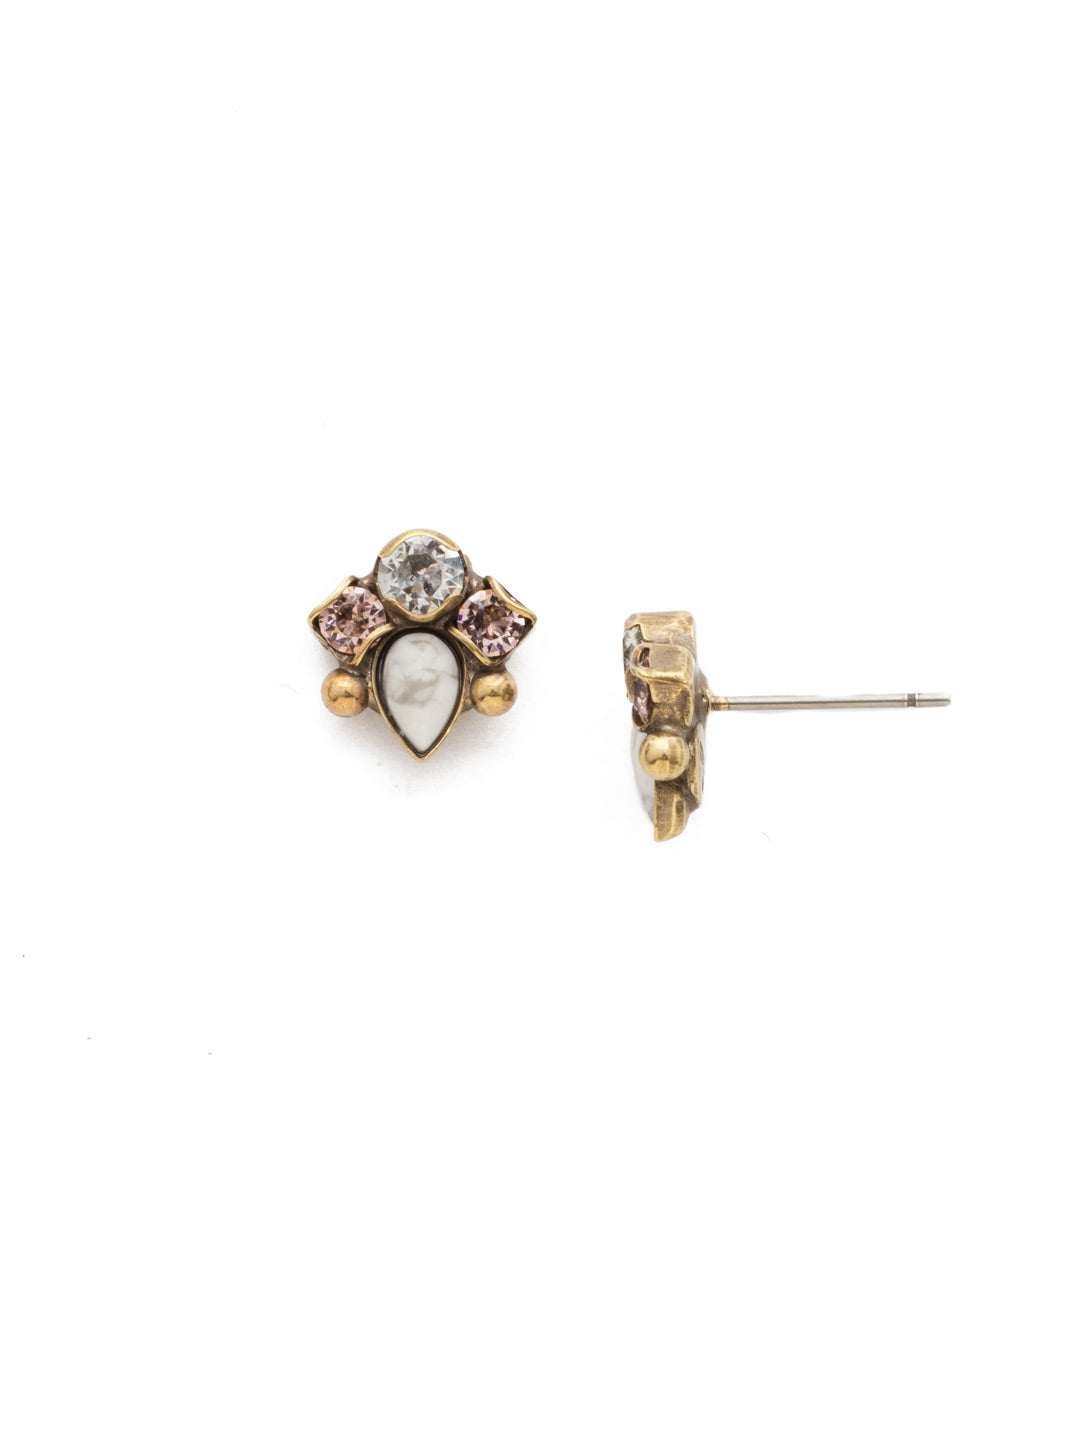 Buzzworthy Stud Earring - EDN49AGWMA - <p>A playful, fresh design great for everyday wear. Have your friends buzzing about your great style! From Sorrelli's White Magnolia collection in our Antique Gold-tone finish.</p>